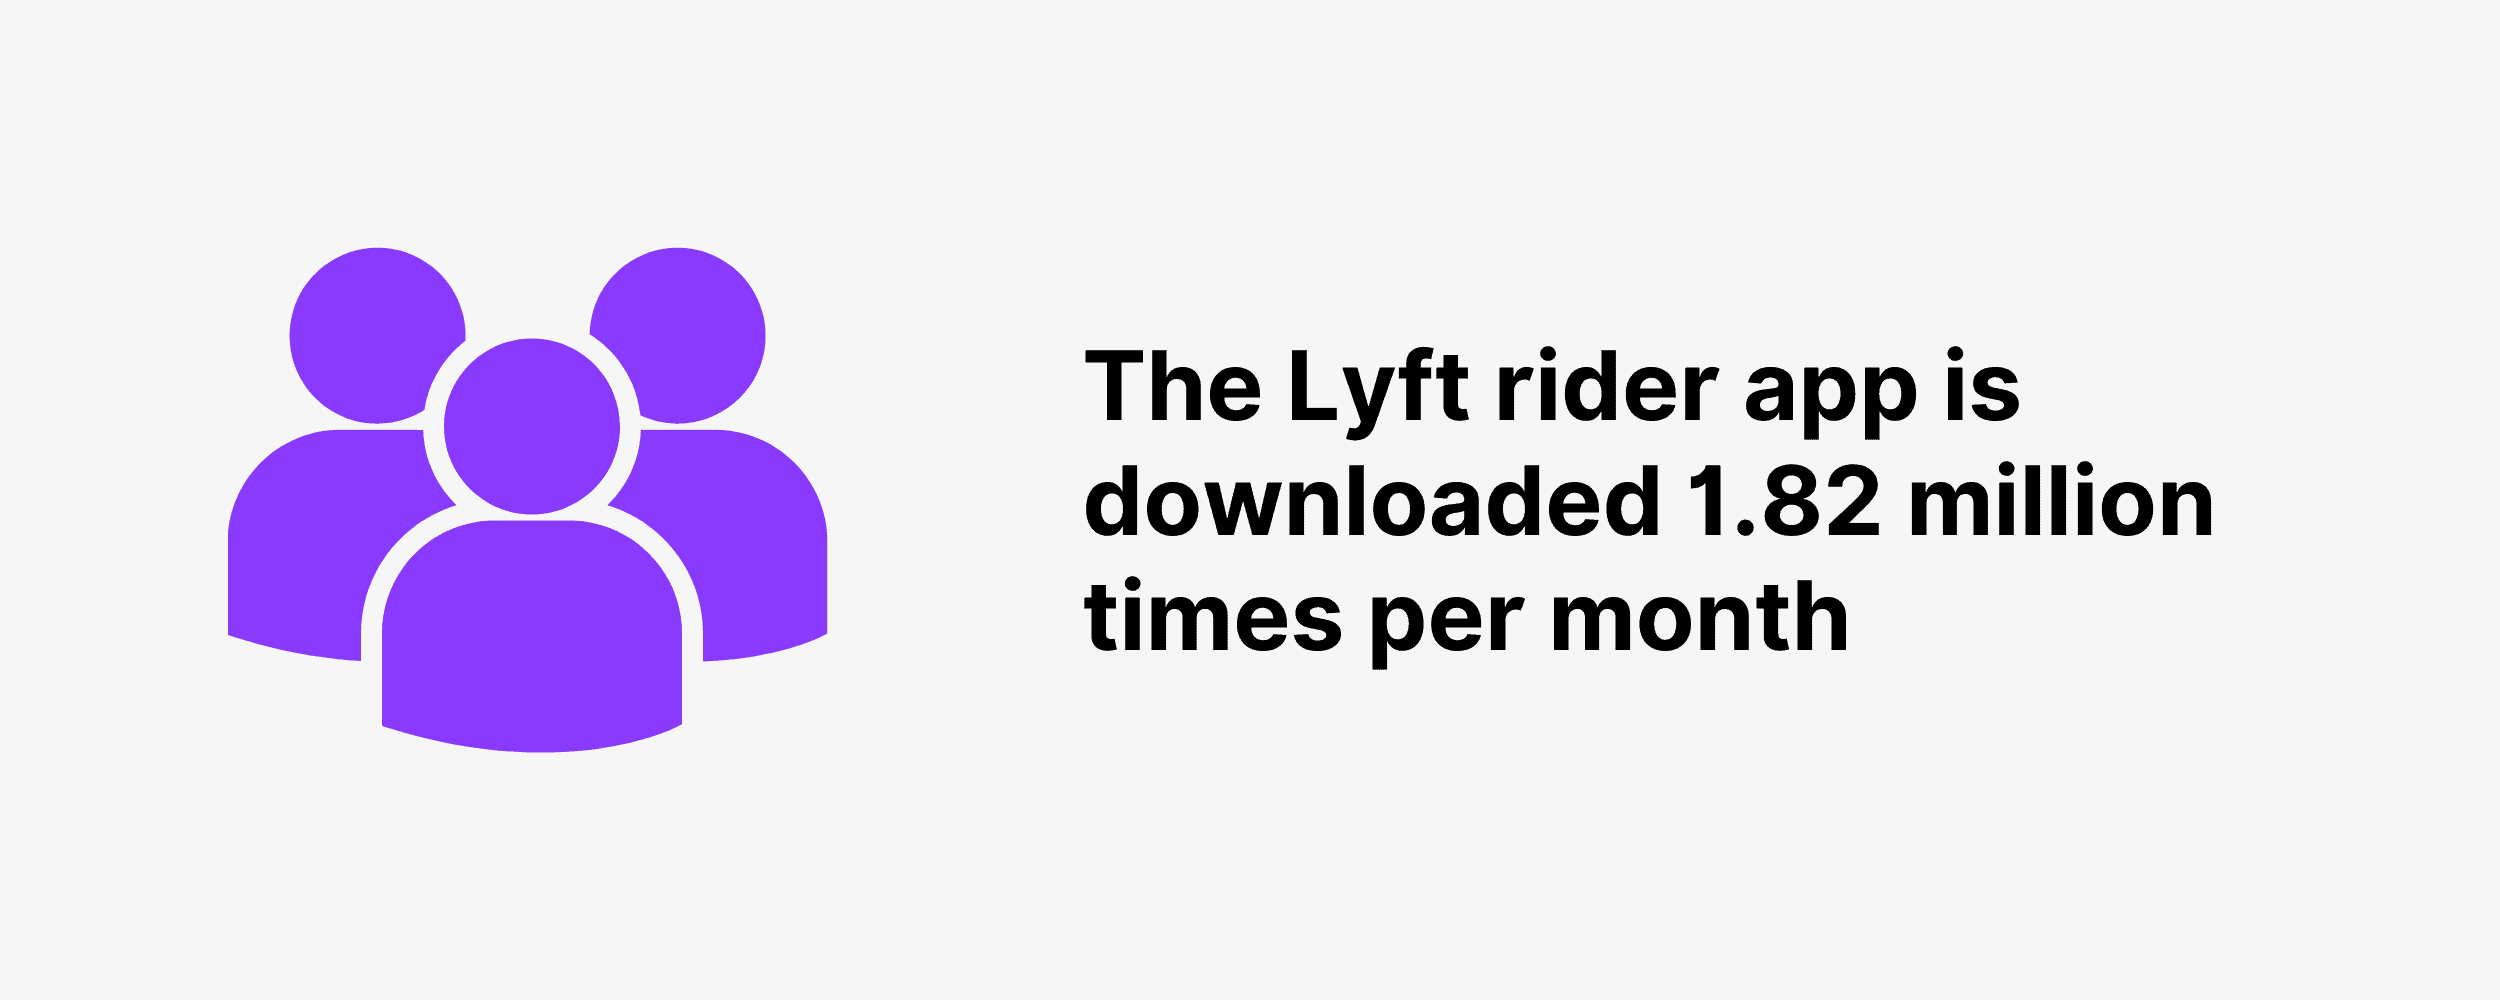 The Lyft rider app is downloaded 1.82 million times per month